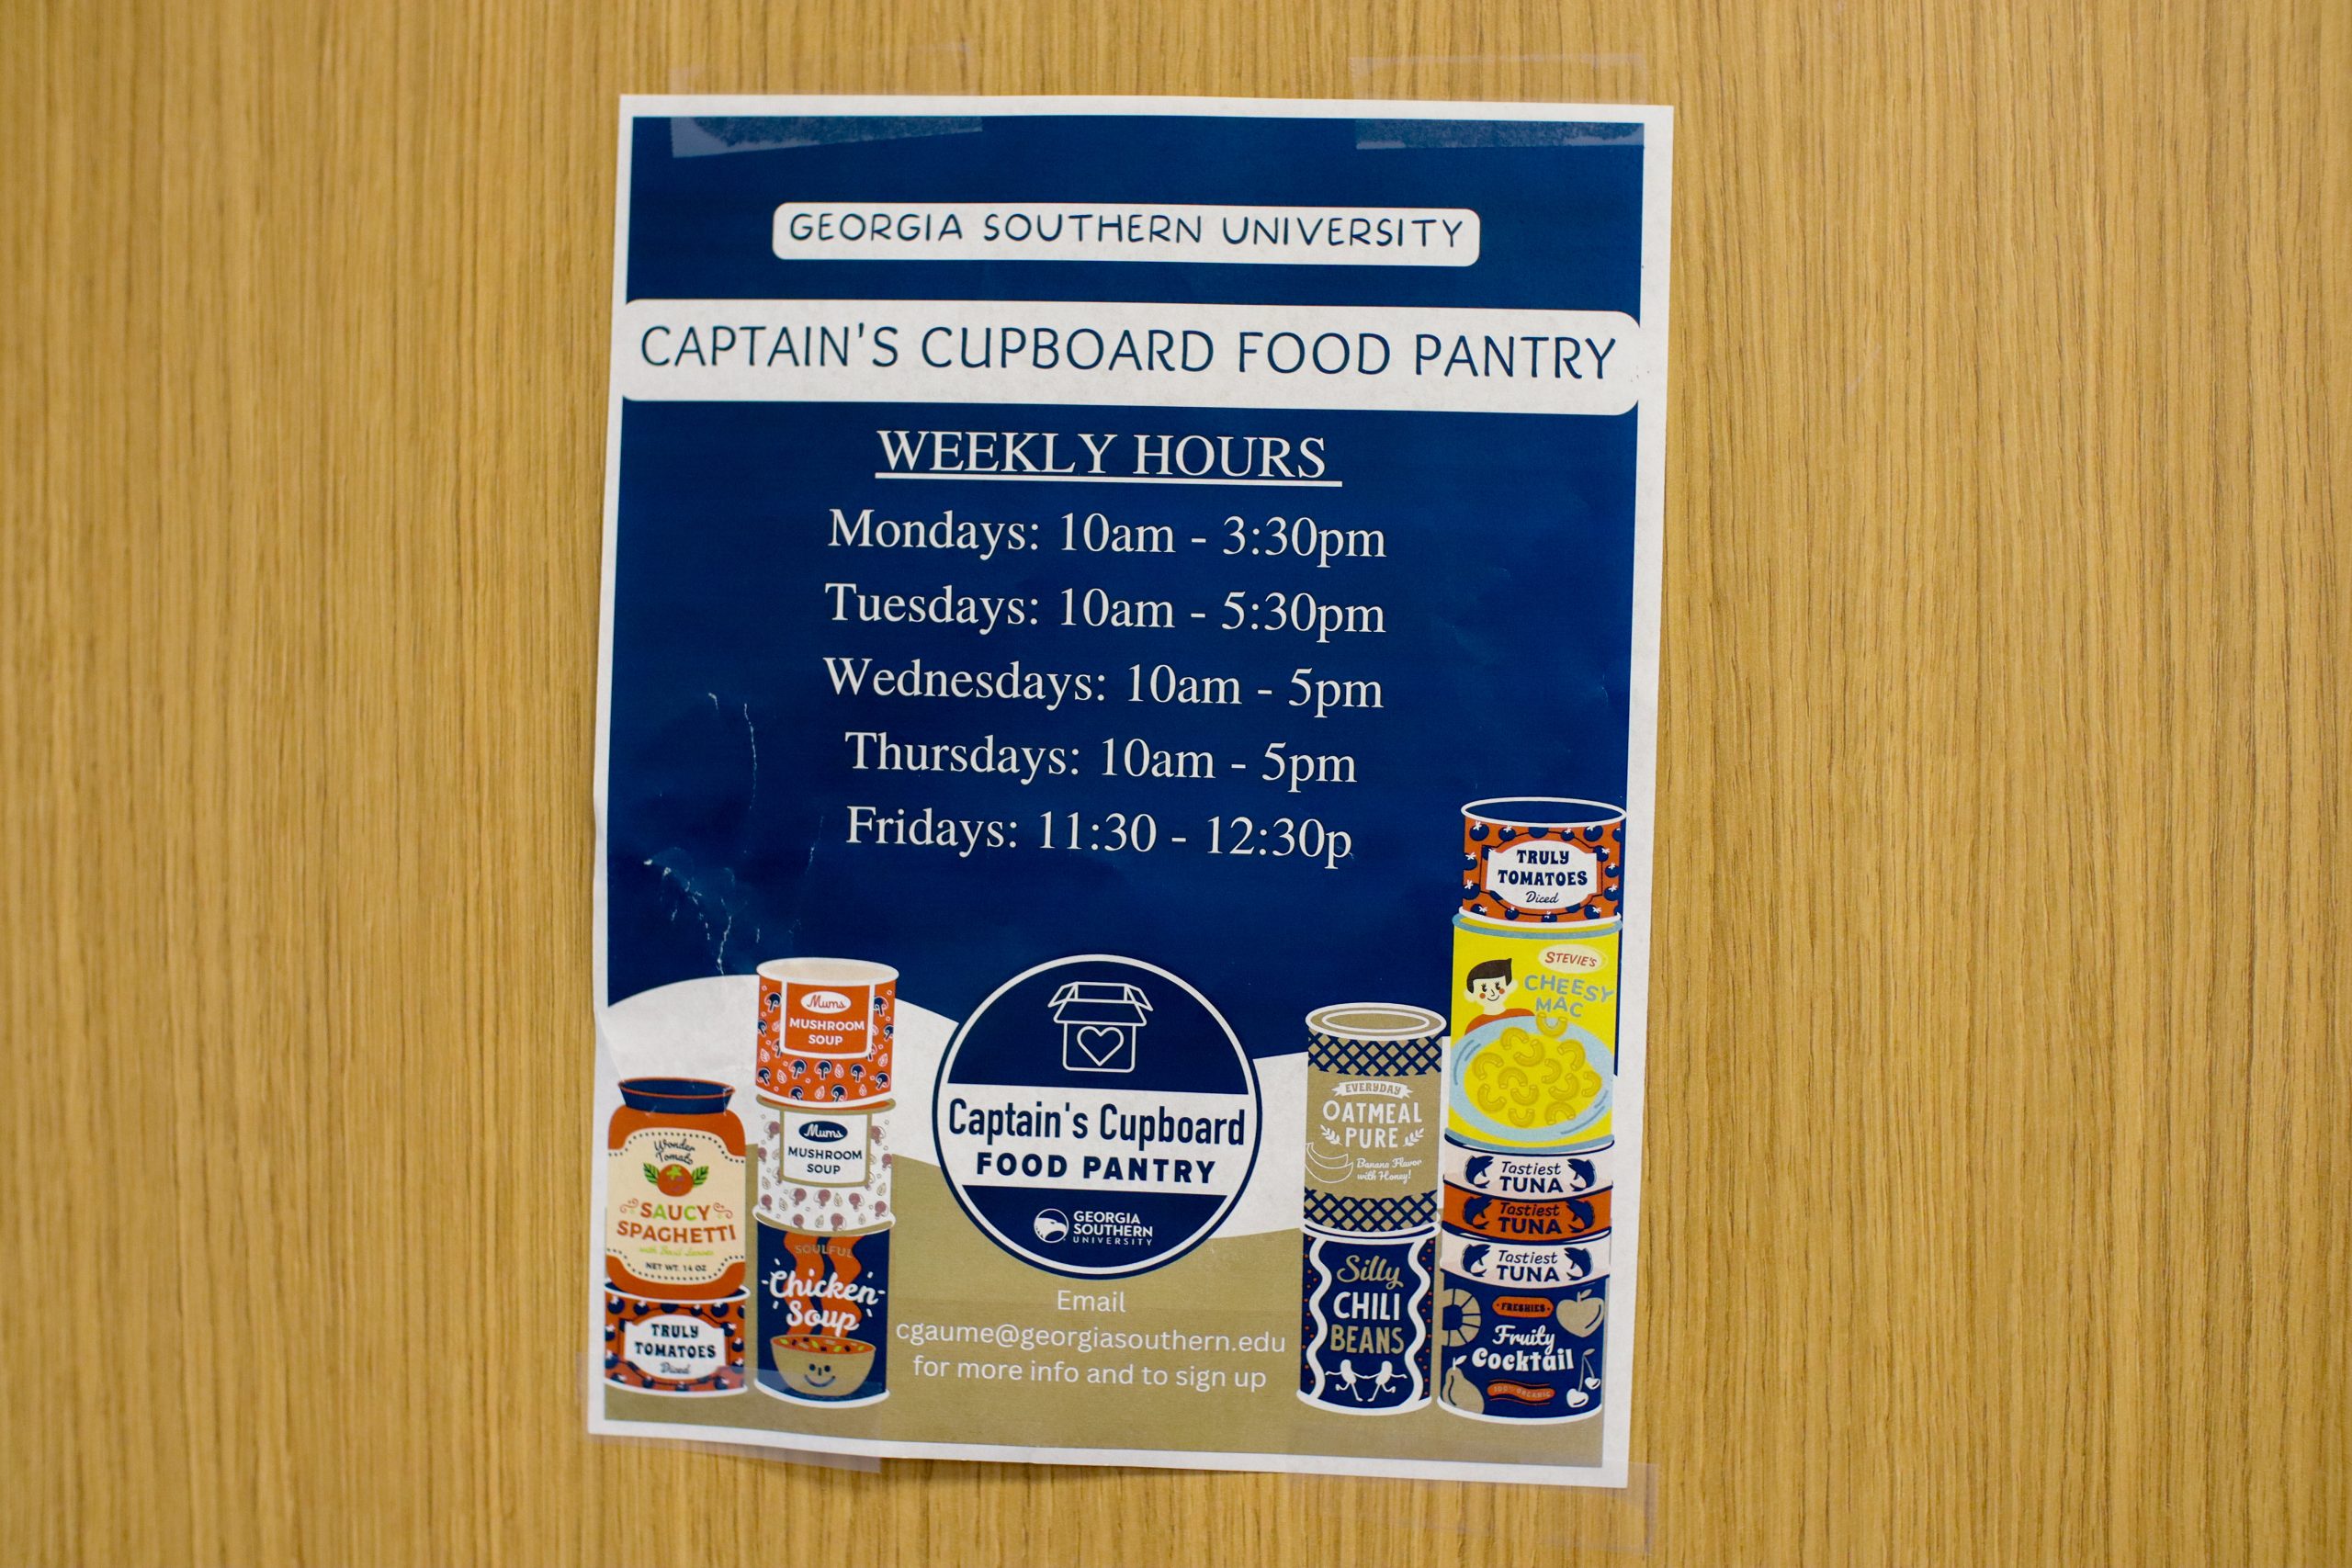 How+the+Captains+Cupboard+is+Combating+Food+Insecurity+on+Campus